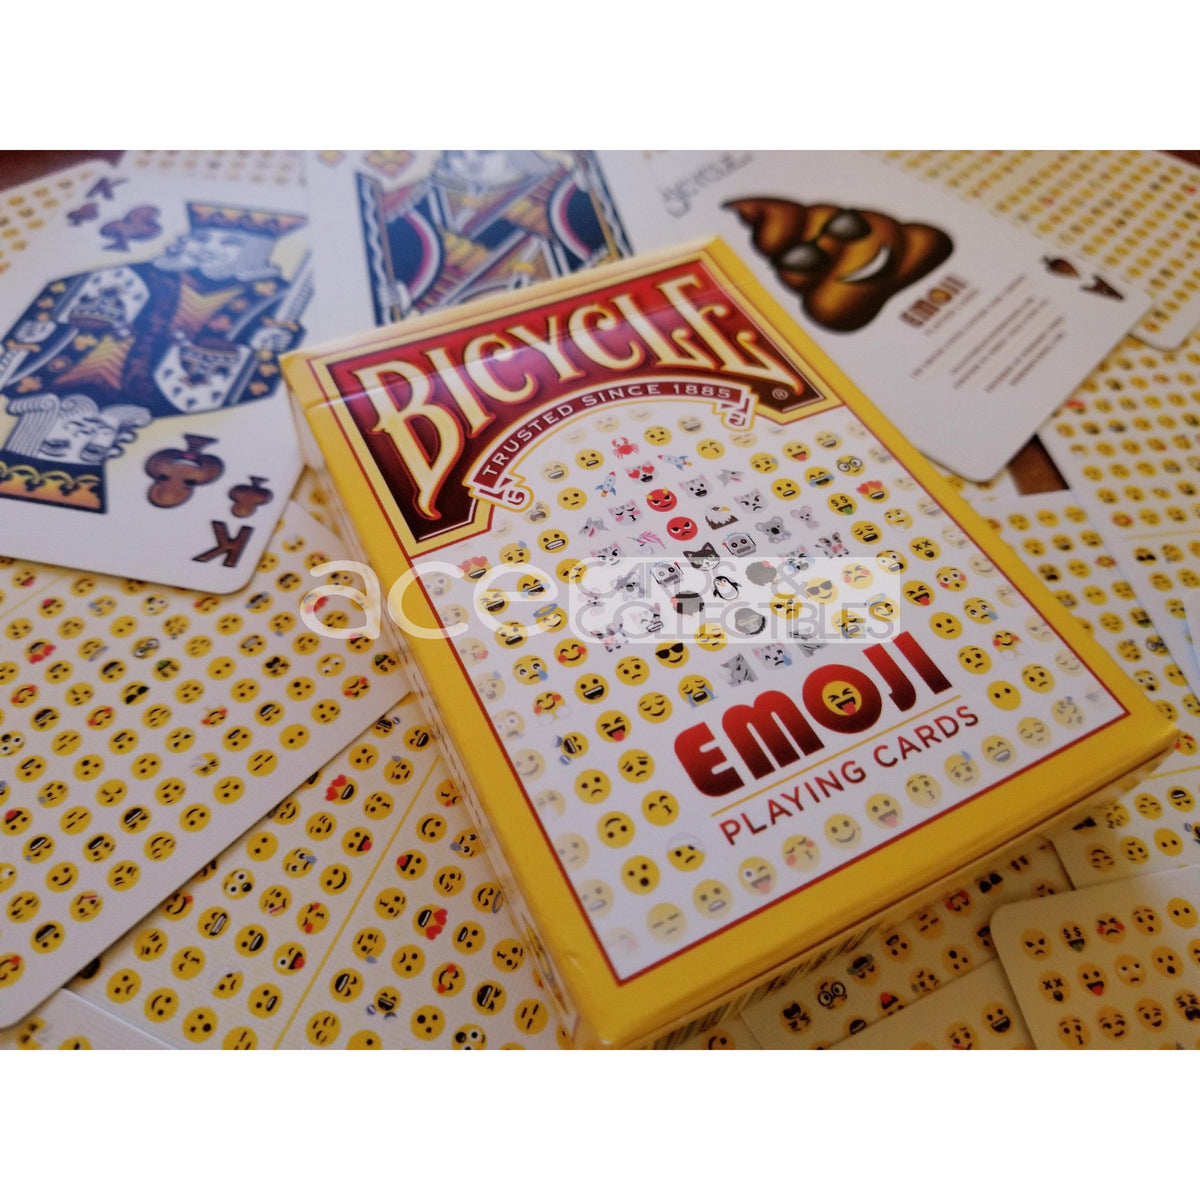 Bicycle Emoji Playing Cards-United States Playing Cards Company-Ace Cards &amp; Collectibles